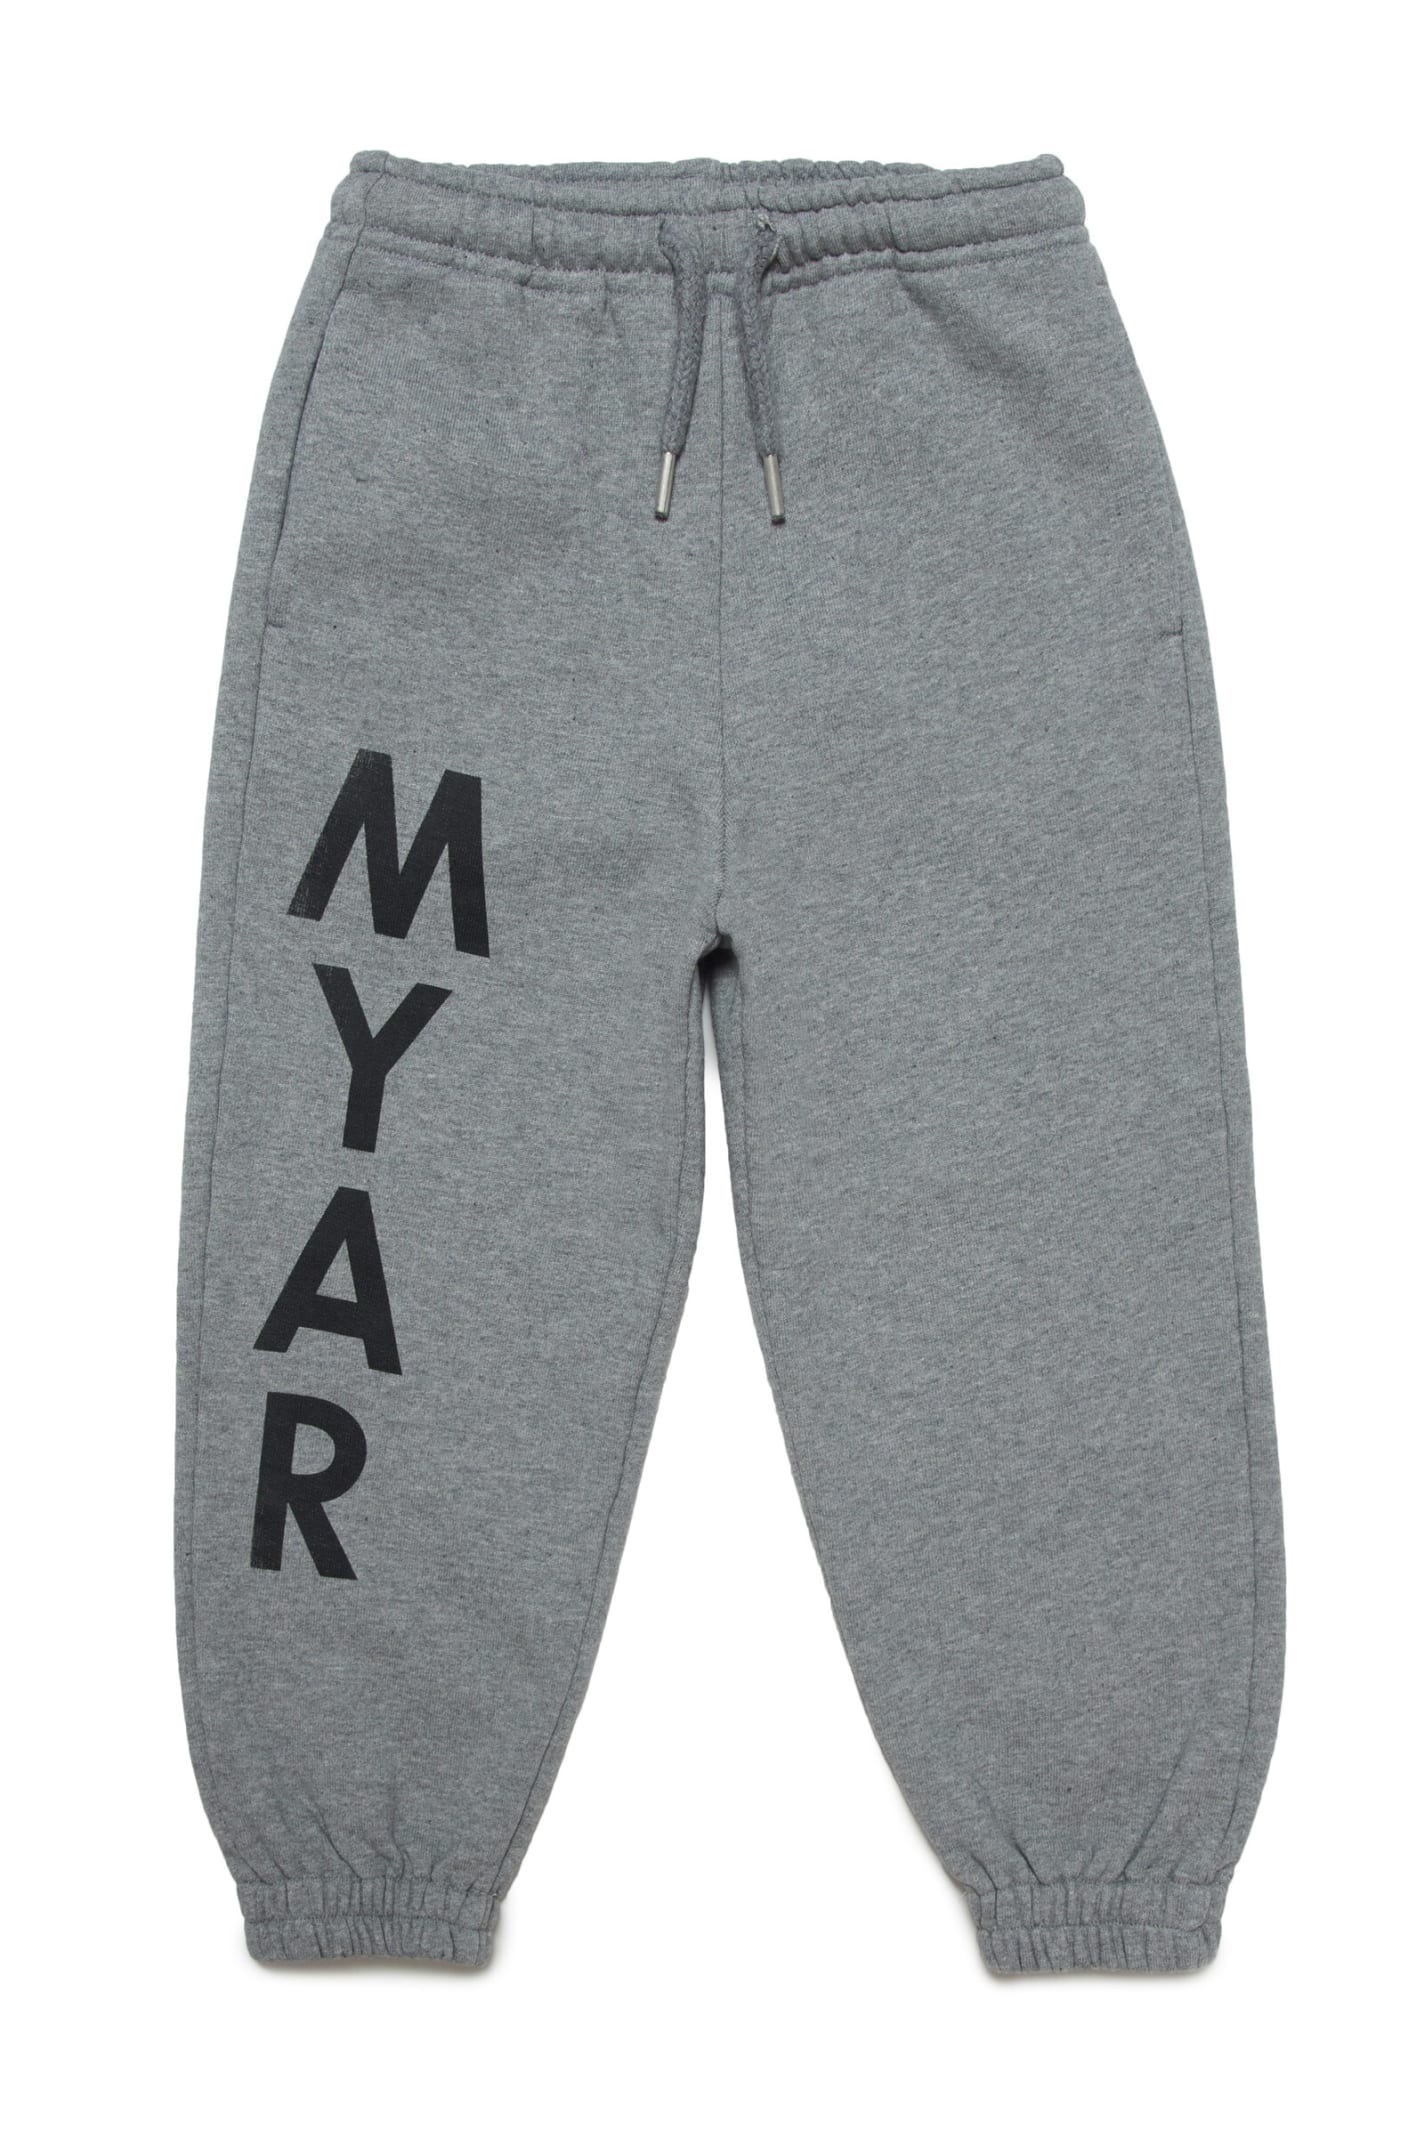 MYAR MYP5U TROUSERS MYAR DEADSTOCK GREY PLUSH JOGGER TROUSERS WITH VERTICAL LOGO